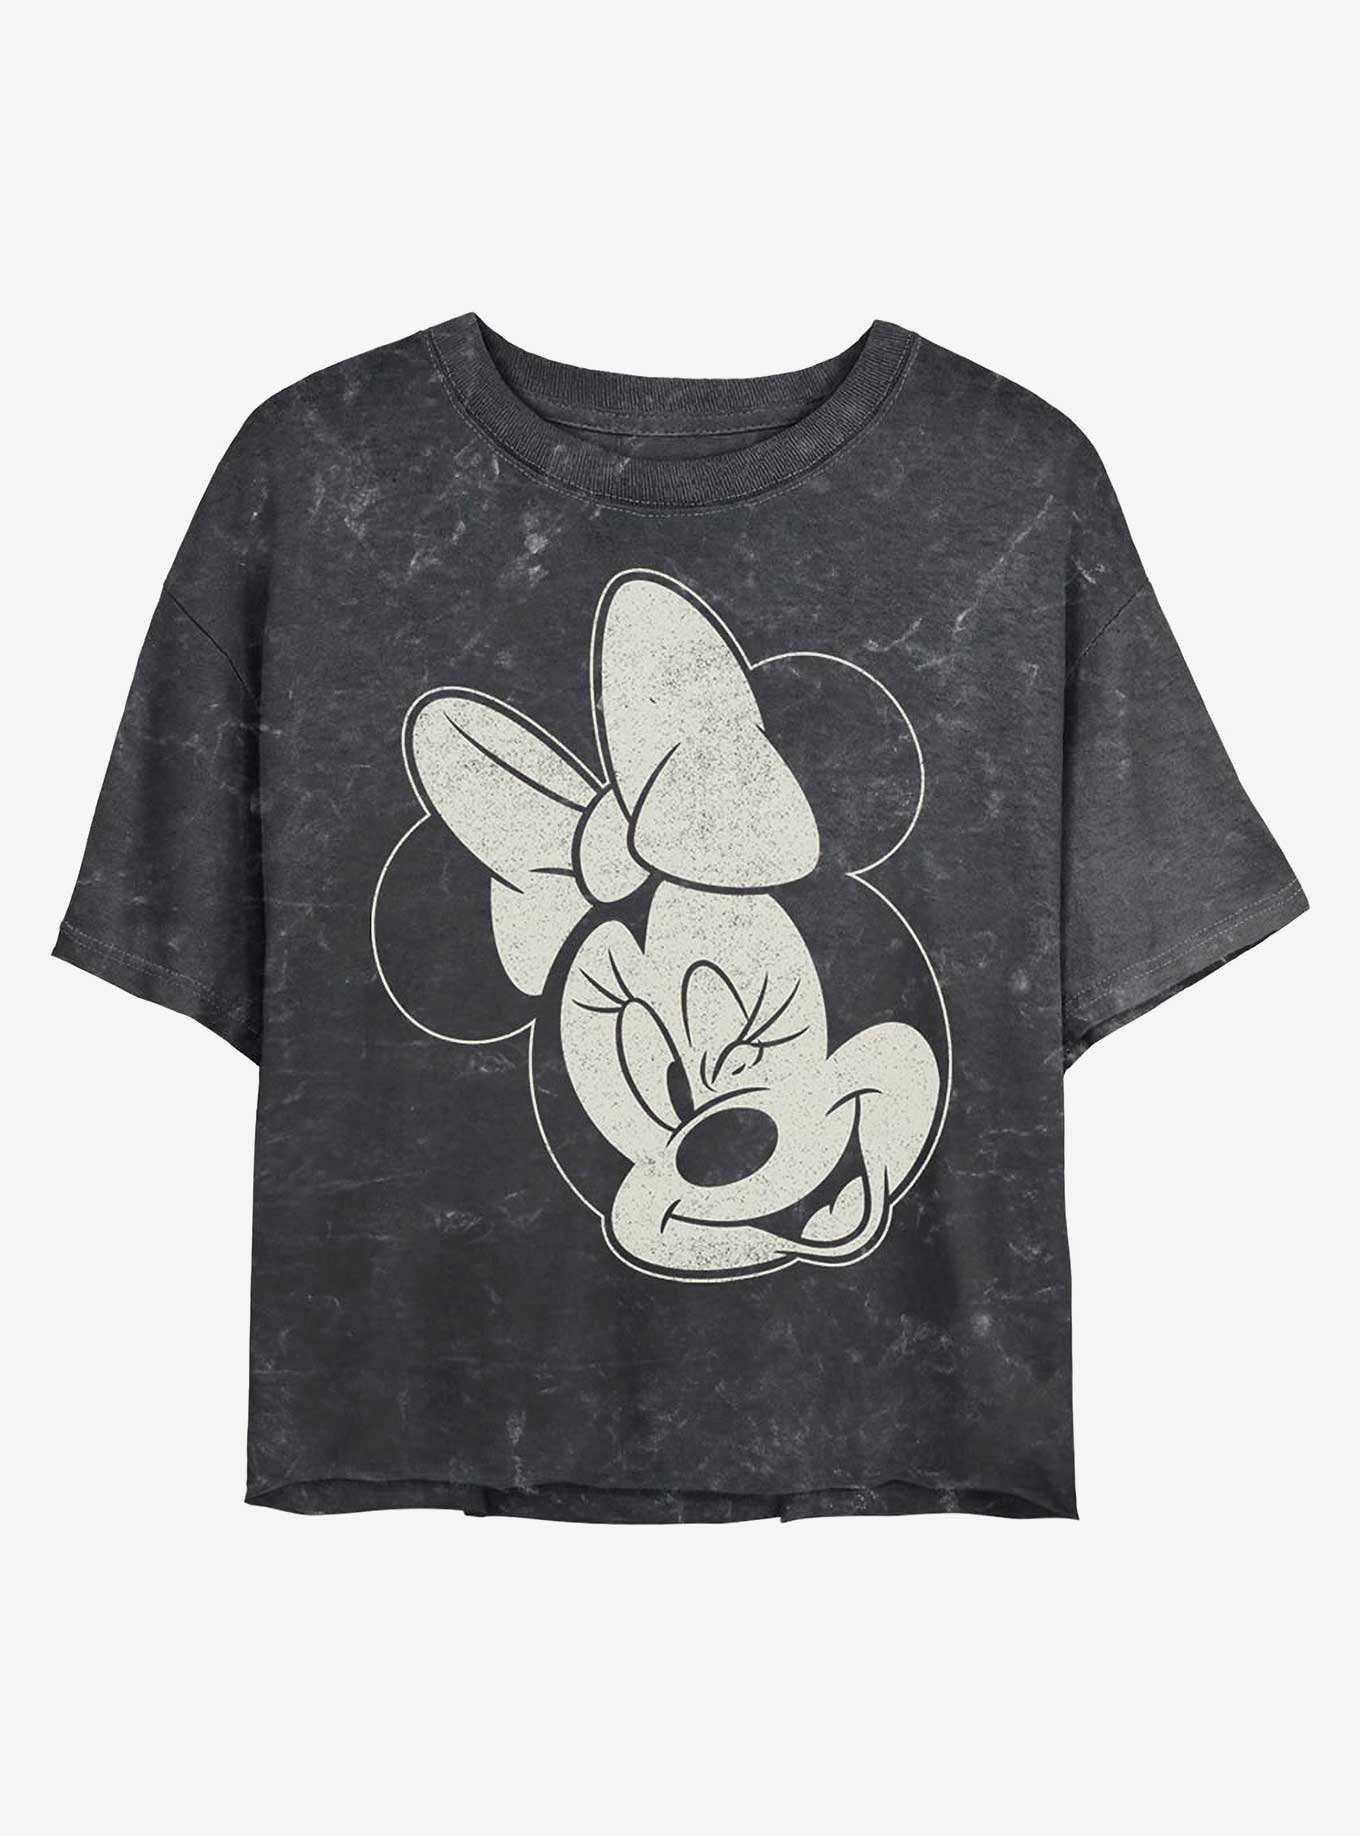 OFFICIAL Minnie Mouse Shirts & Merchandise